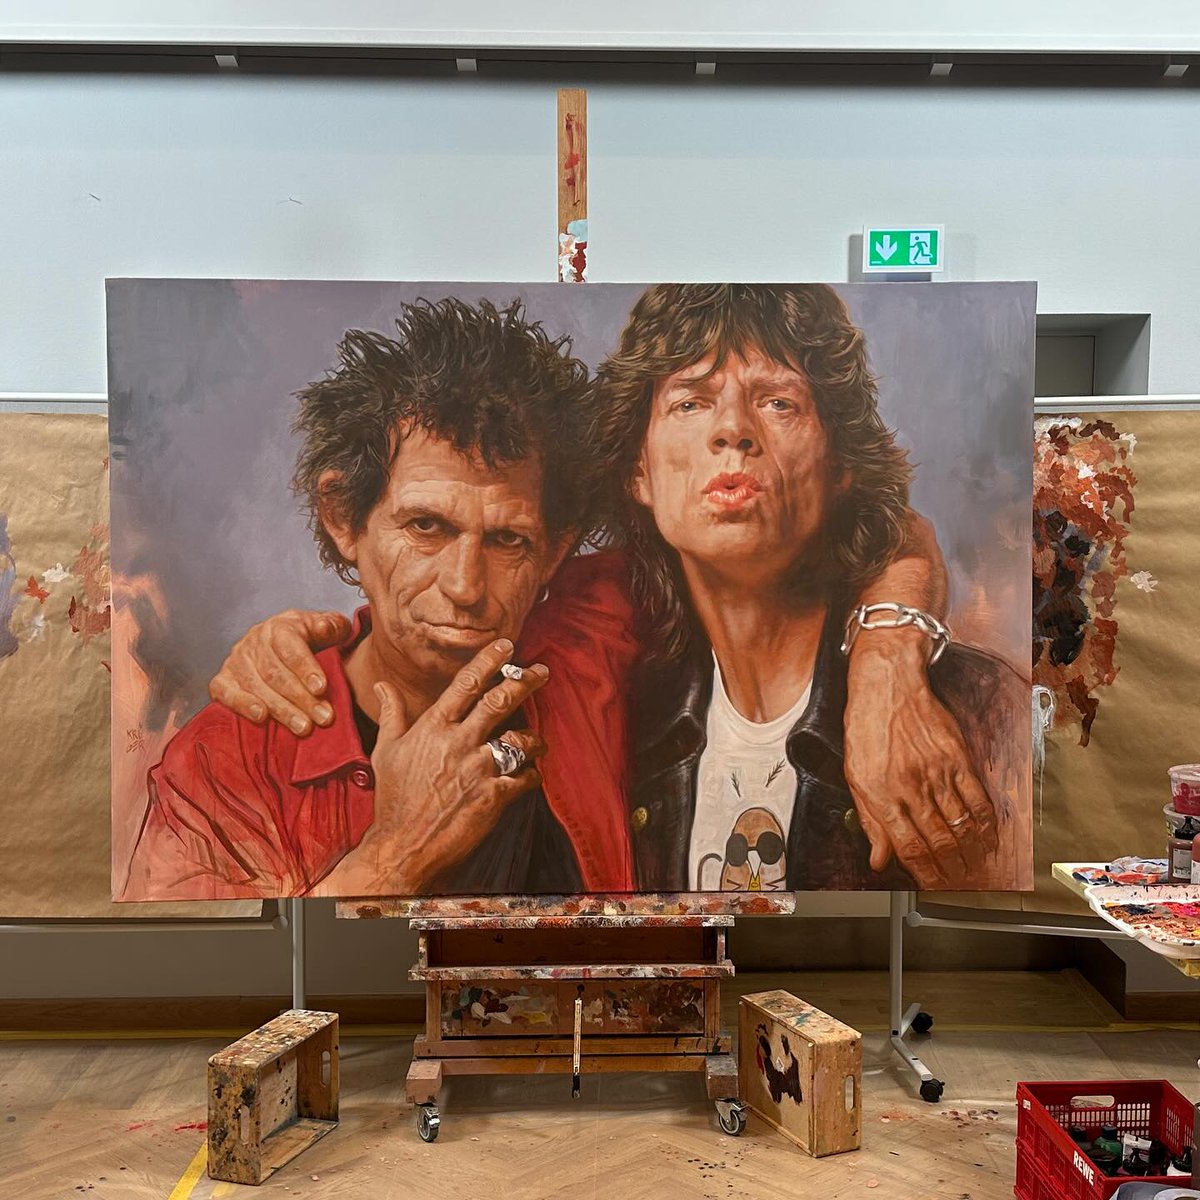 I've always found Sebastian Kruger's artwork truly amazing. His rendering uniquely blends realism with a touch of abstract unlike any other artist. 

#SebastianKruger #TheStones